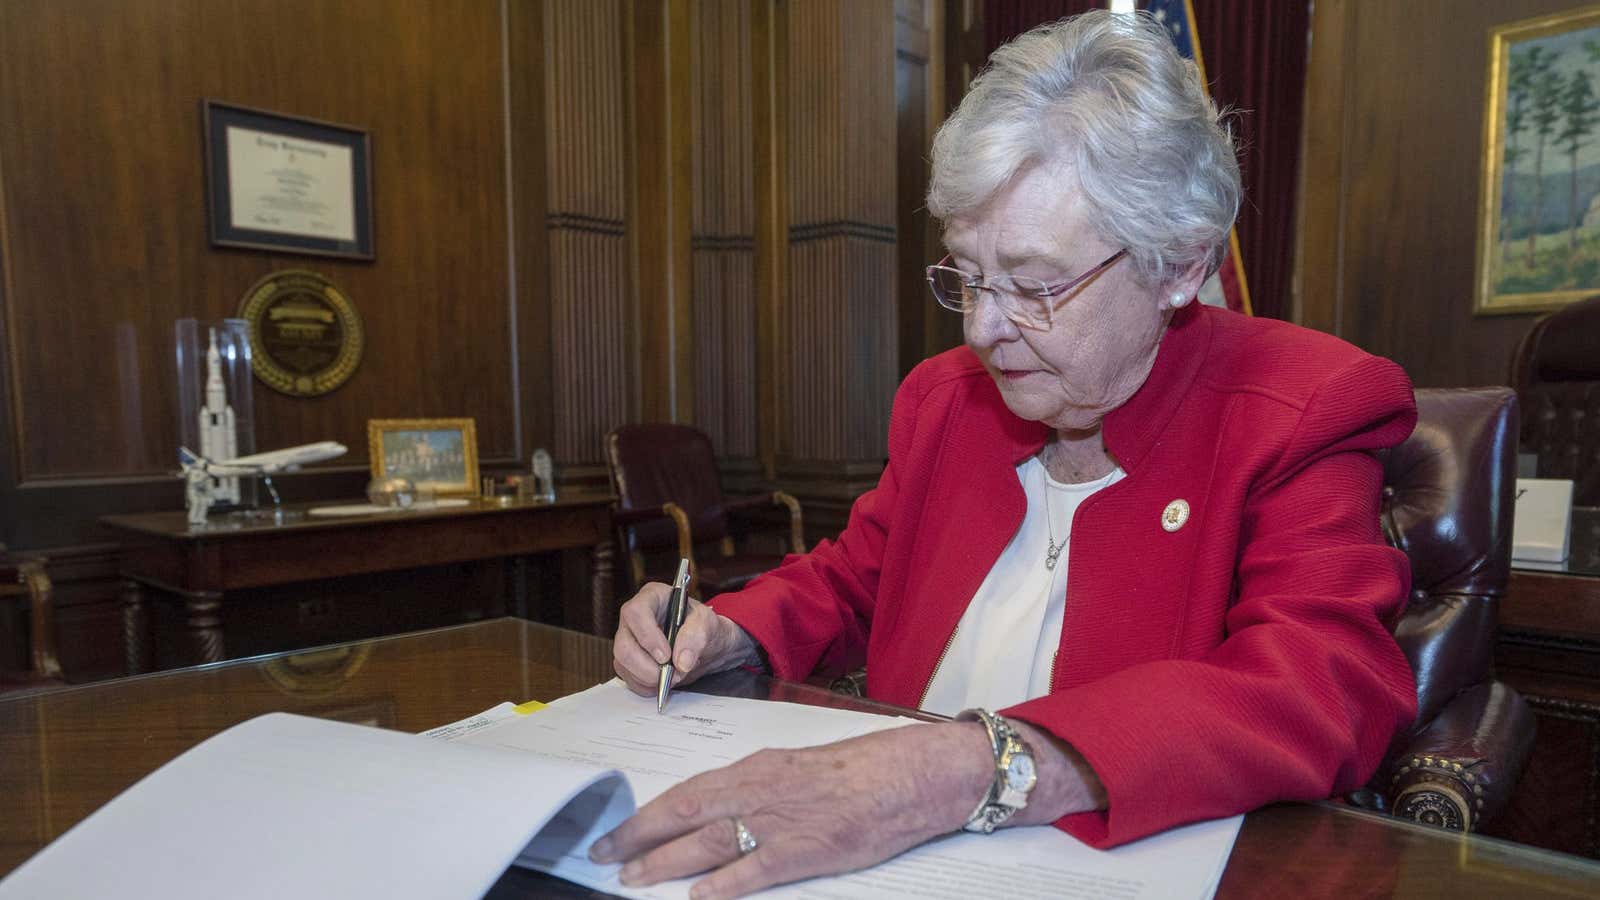 Alabama governor Kay Ivey signs a bill that virtually outlaws abortion in the state.